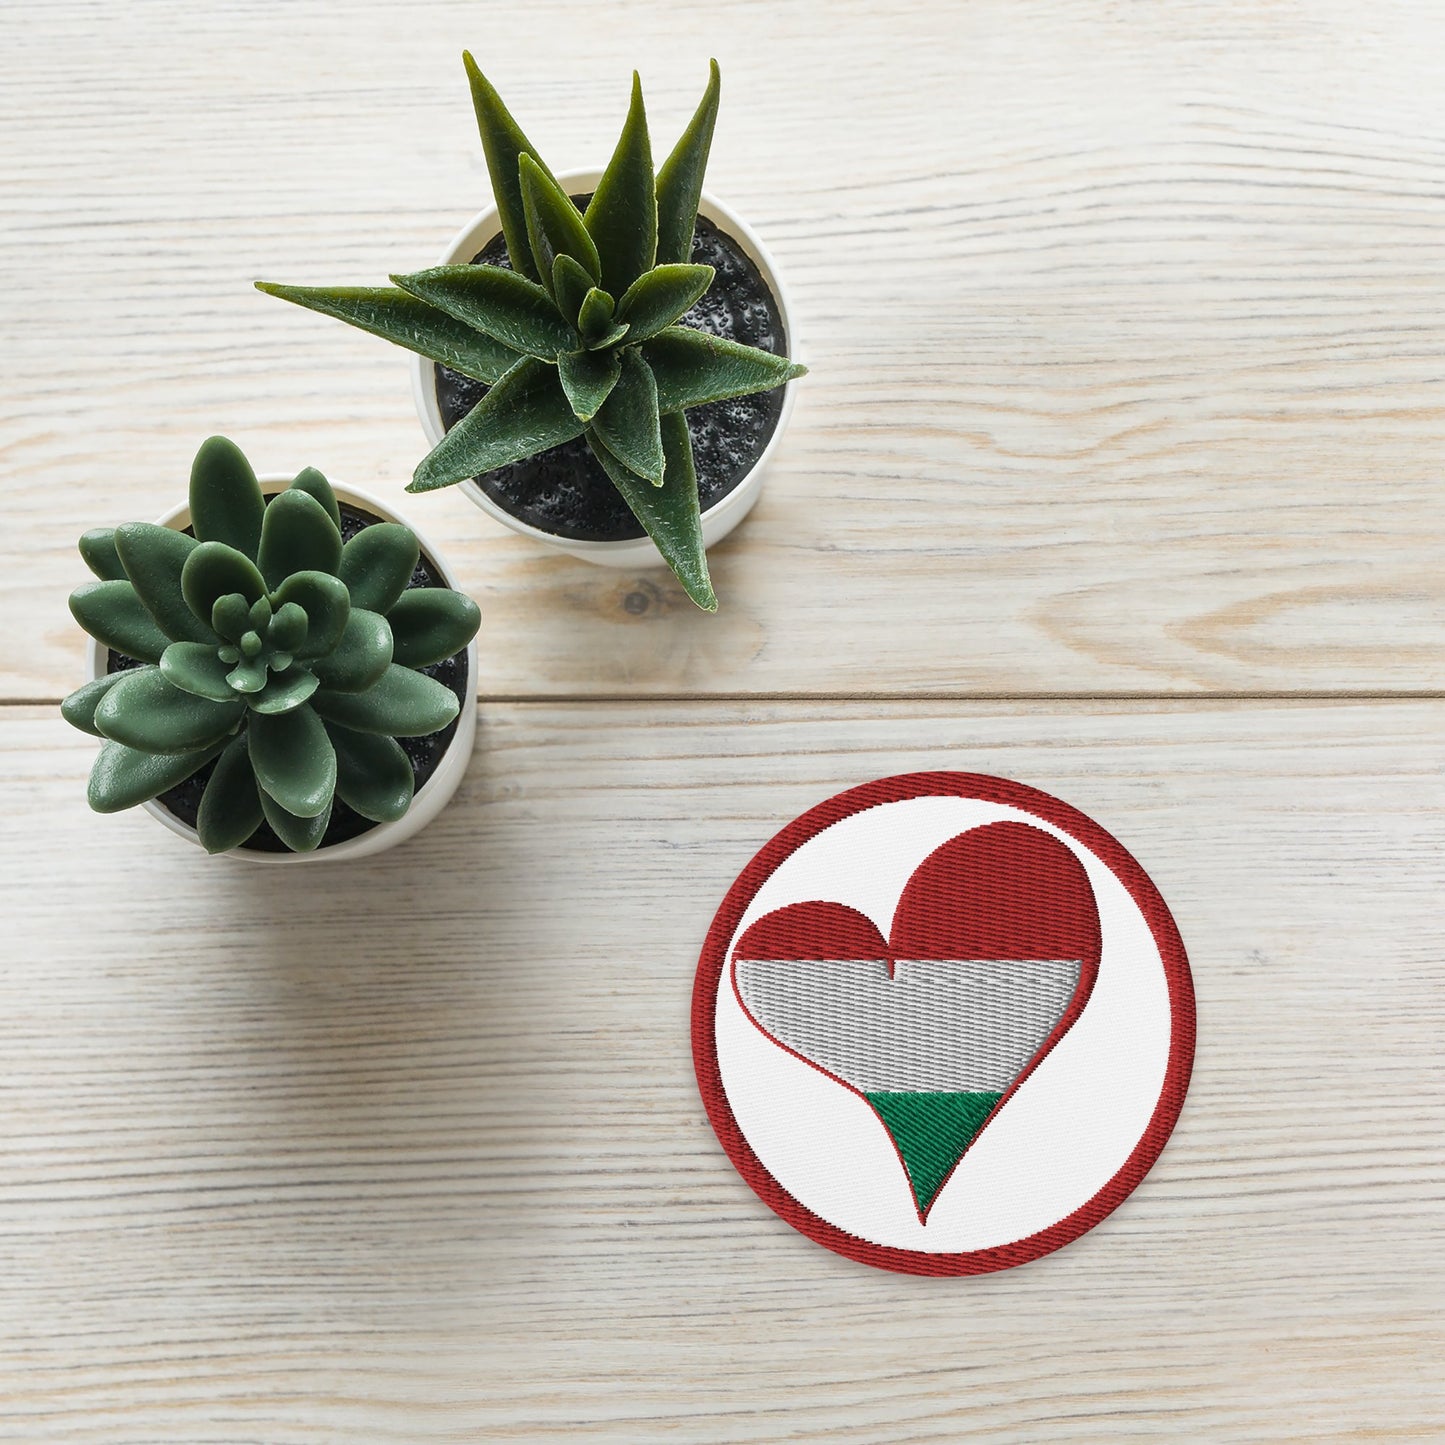 RR™ Hungarian Flag Design Embroidered Patches - Heart - Red Rosehip Studio